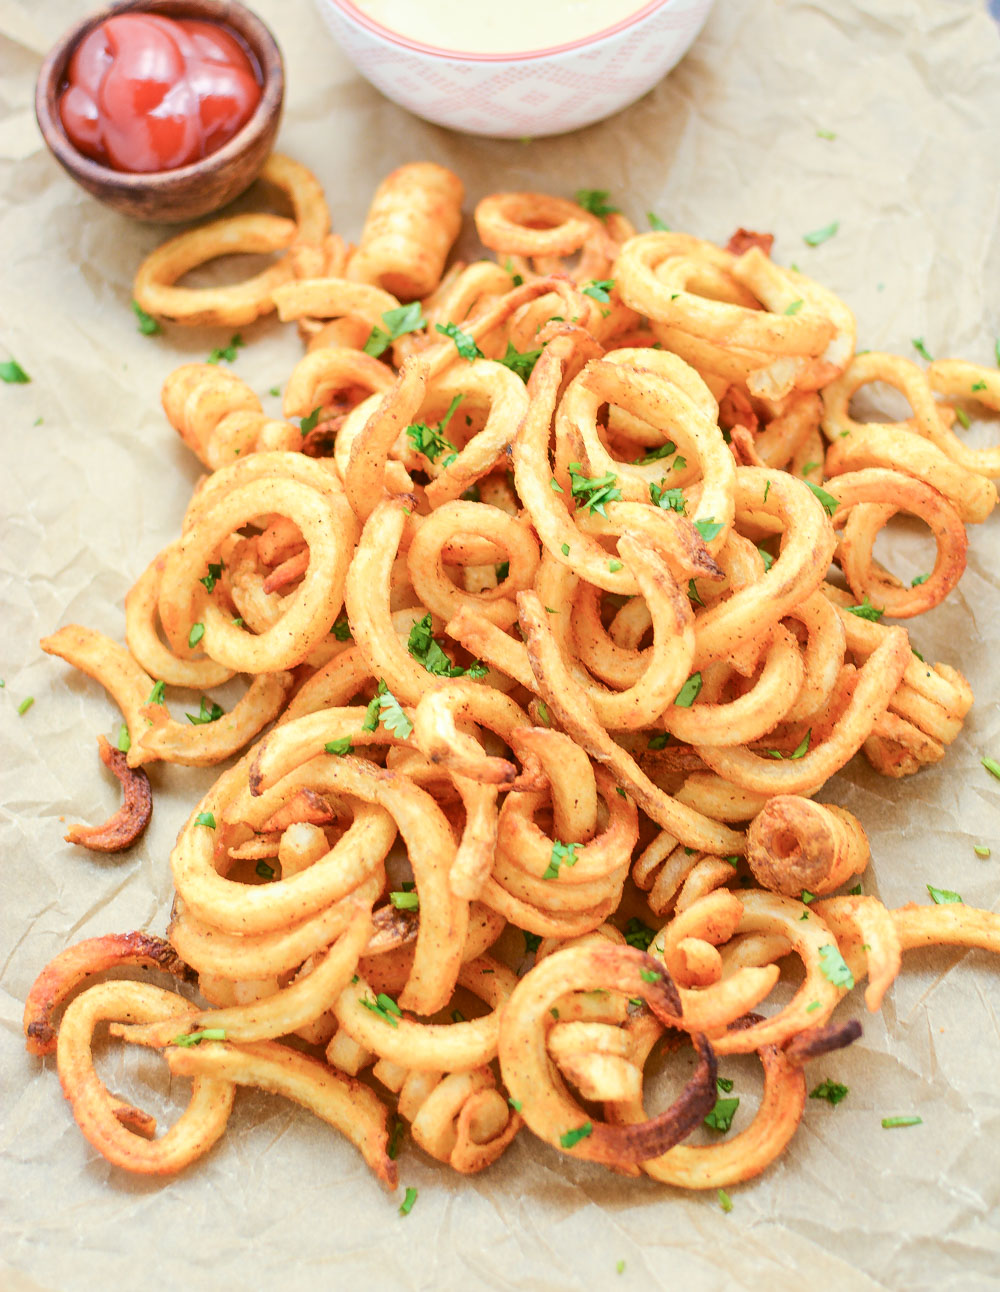 Baked Curly Fries with Mustard-BBQ Dipping Sauce are so easy to make at home and are the perfect side dish!